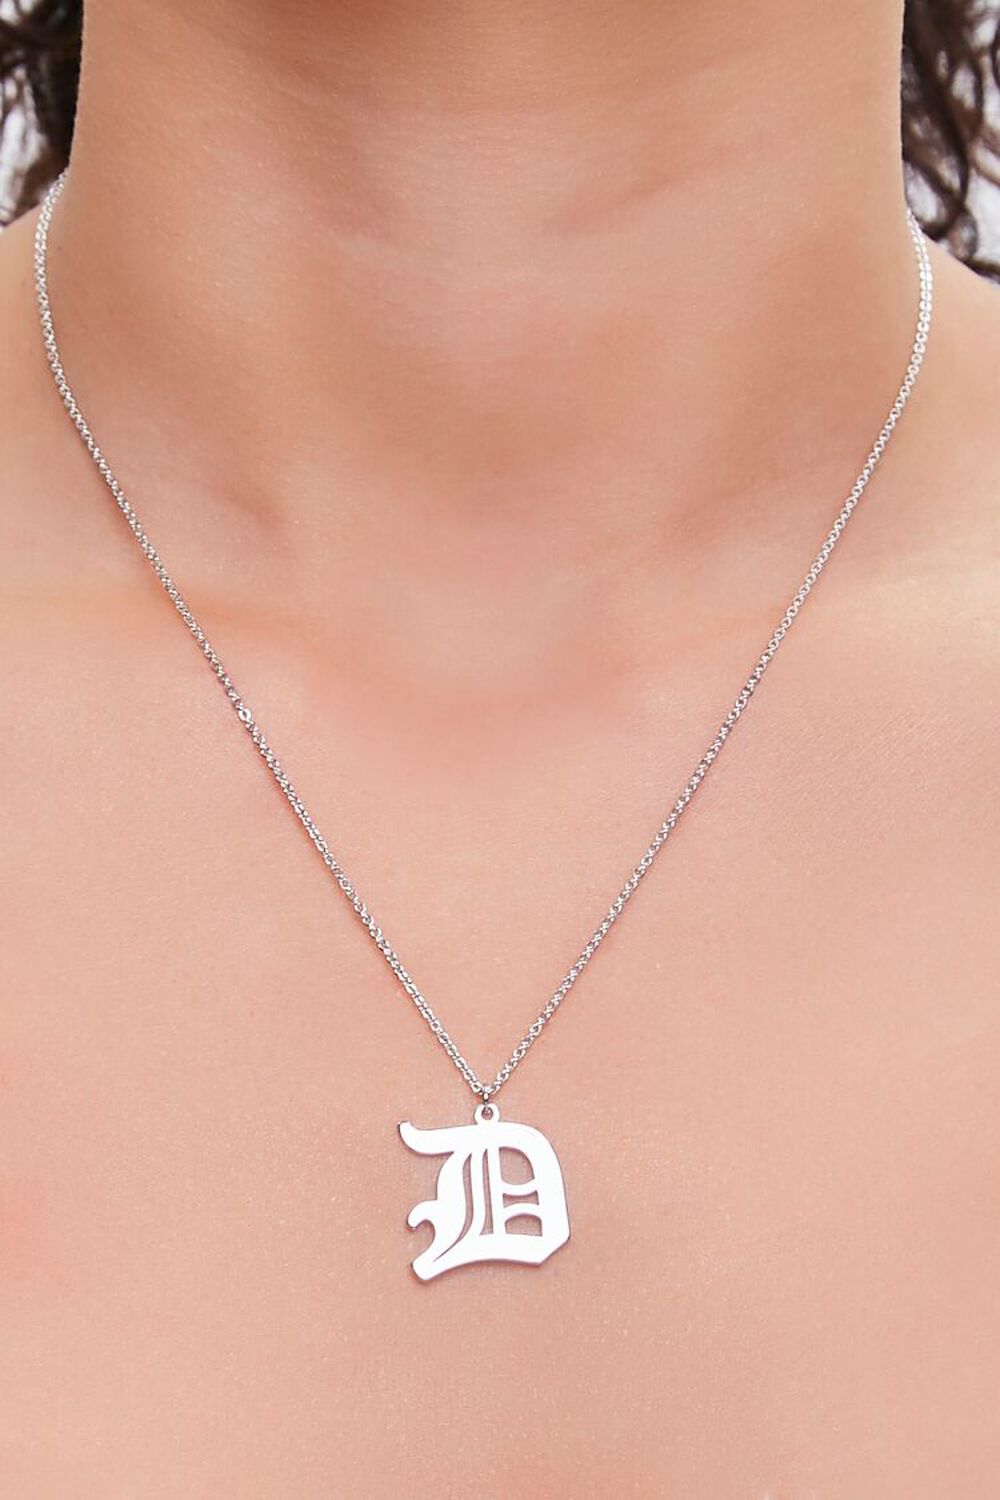 SILVER/D Initial Pendant Chain Necklace, image 1